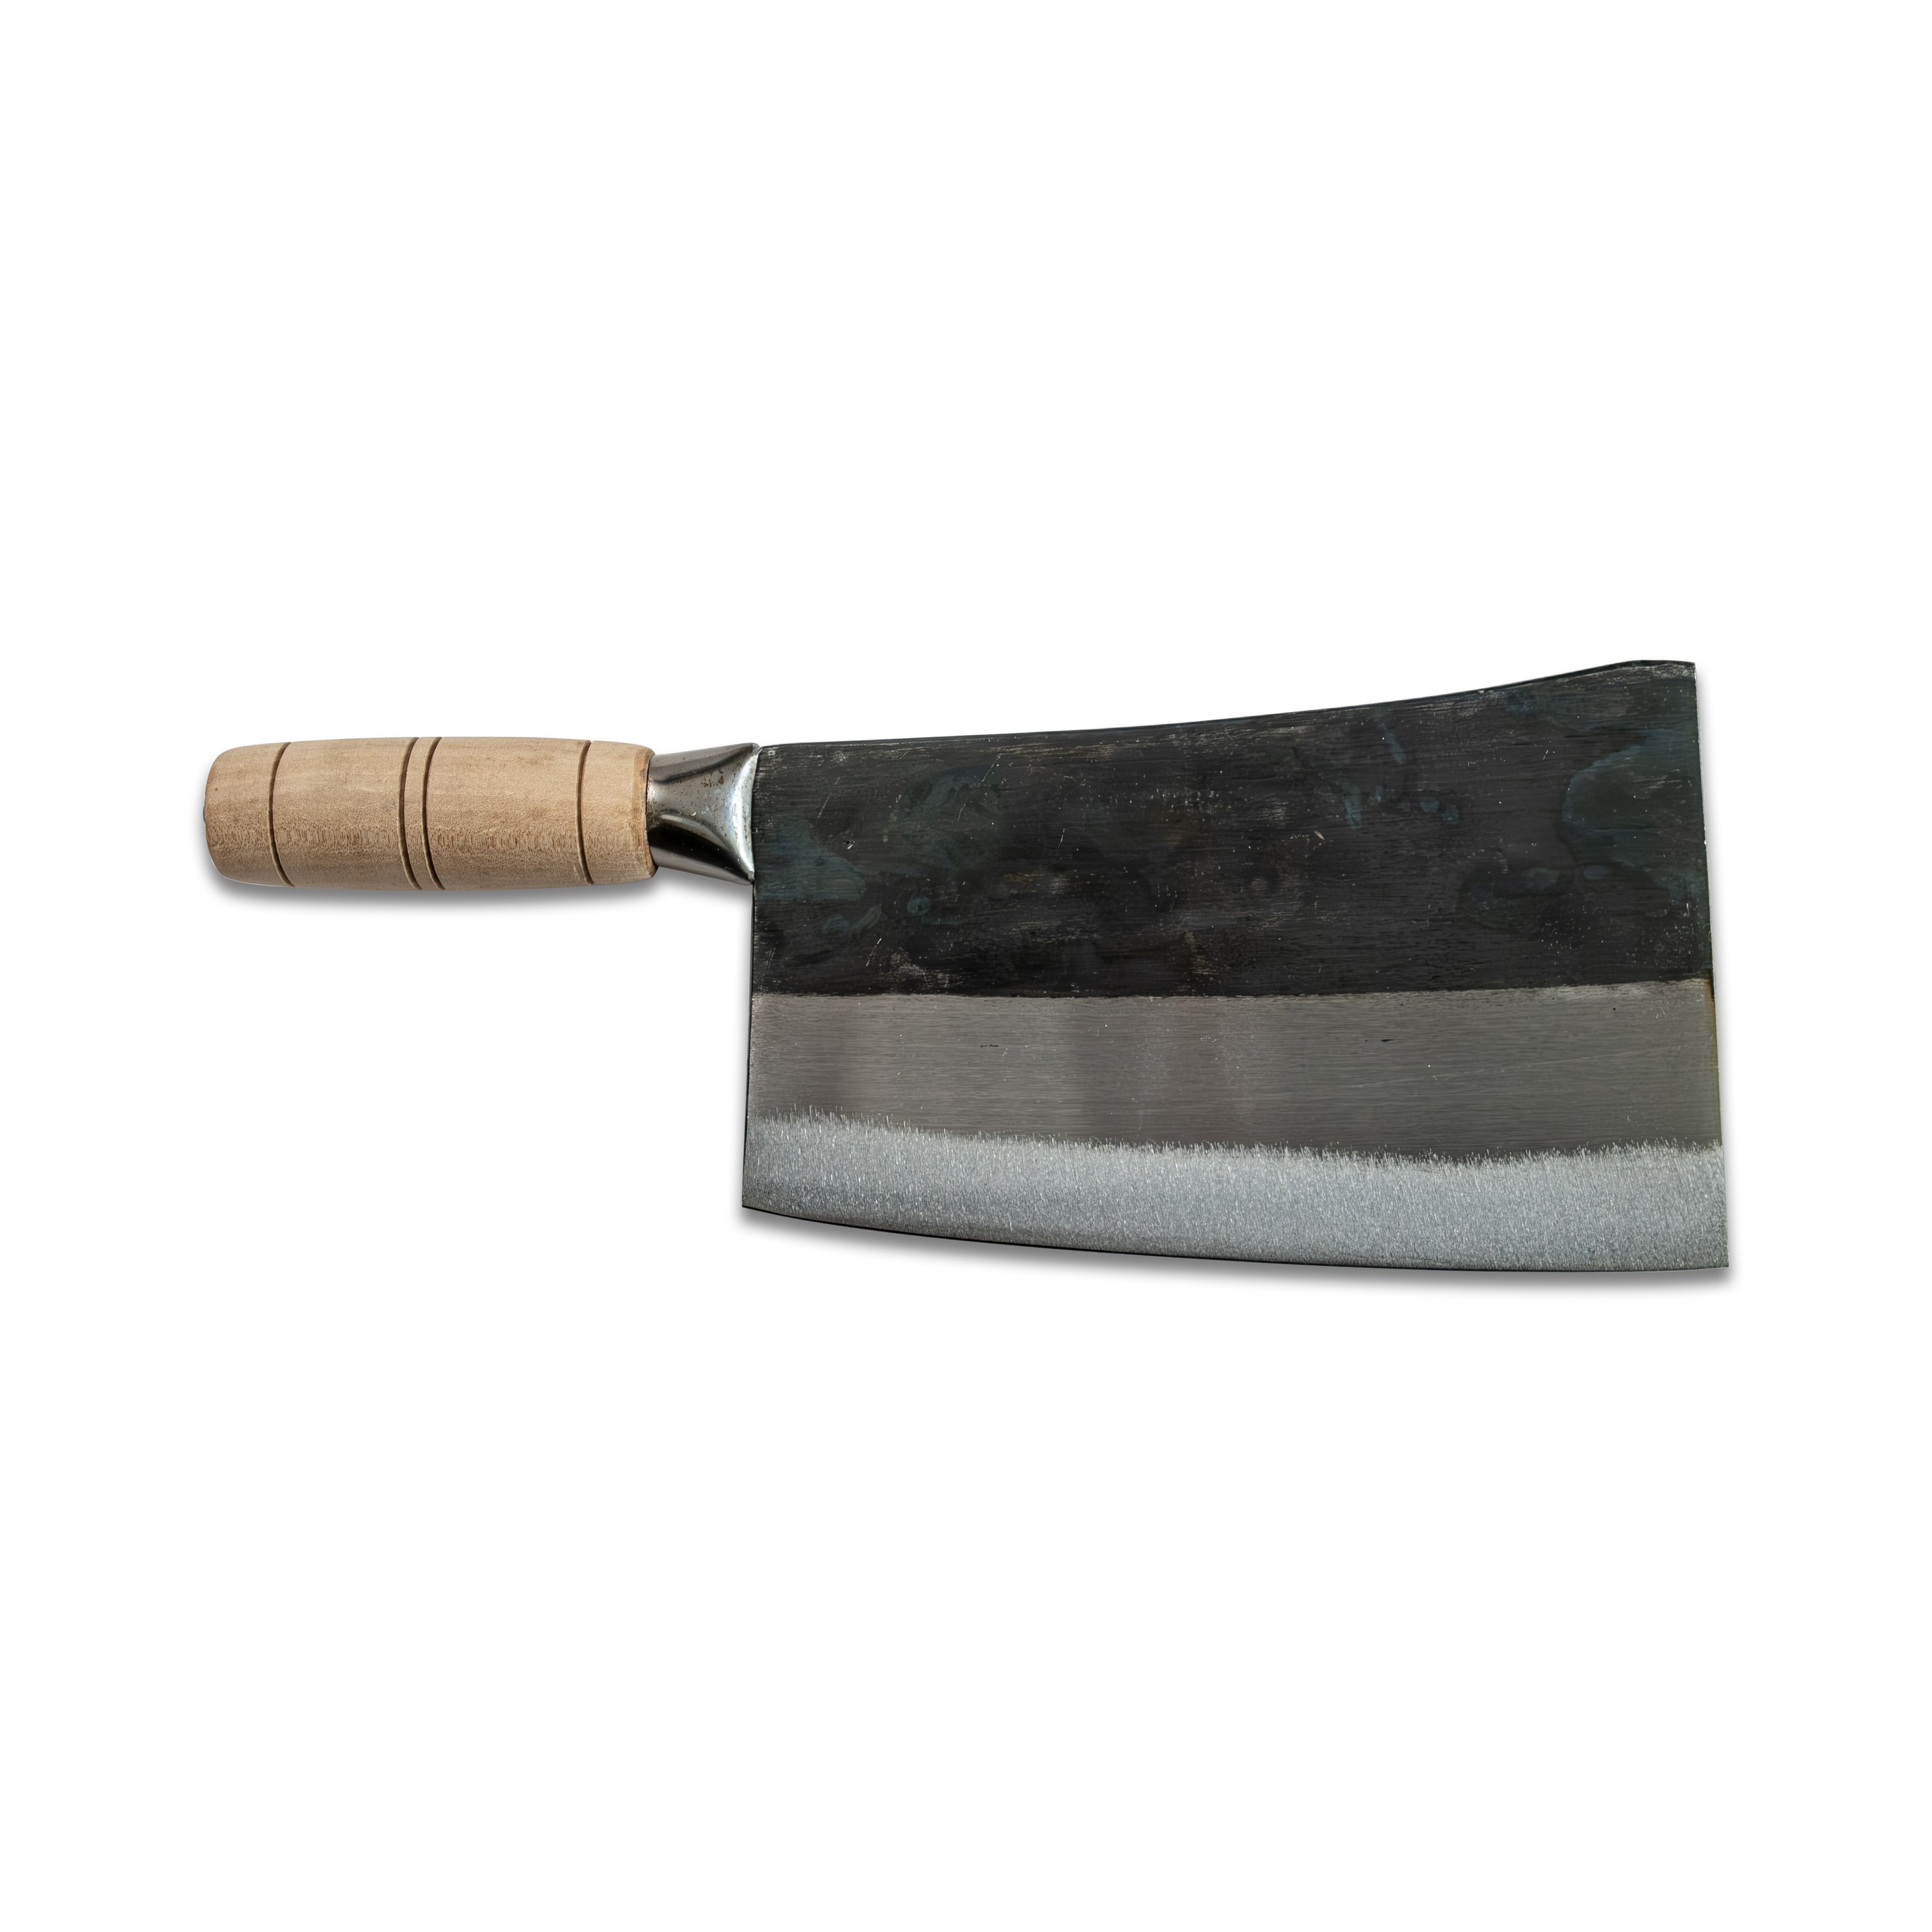 CCK Carbon Kau Kong Chinese Cleaver 195 mm #1